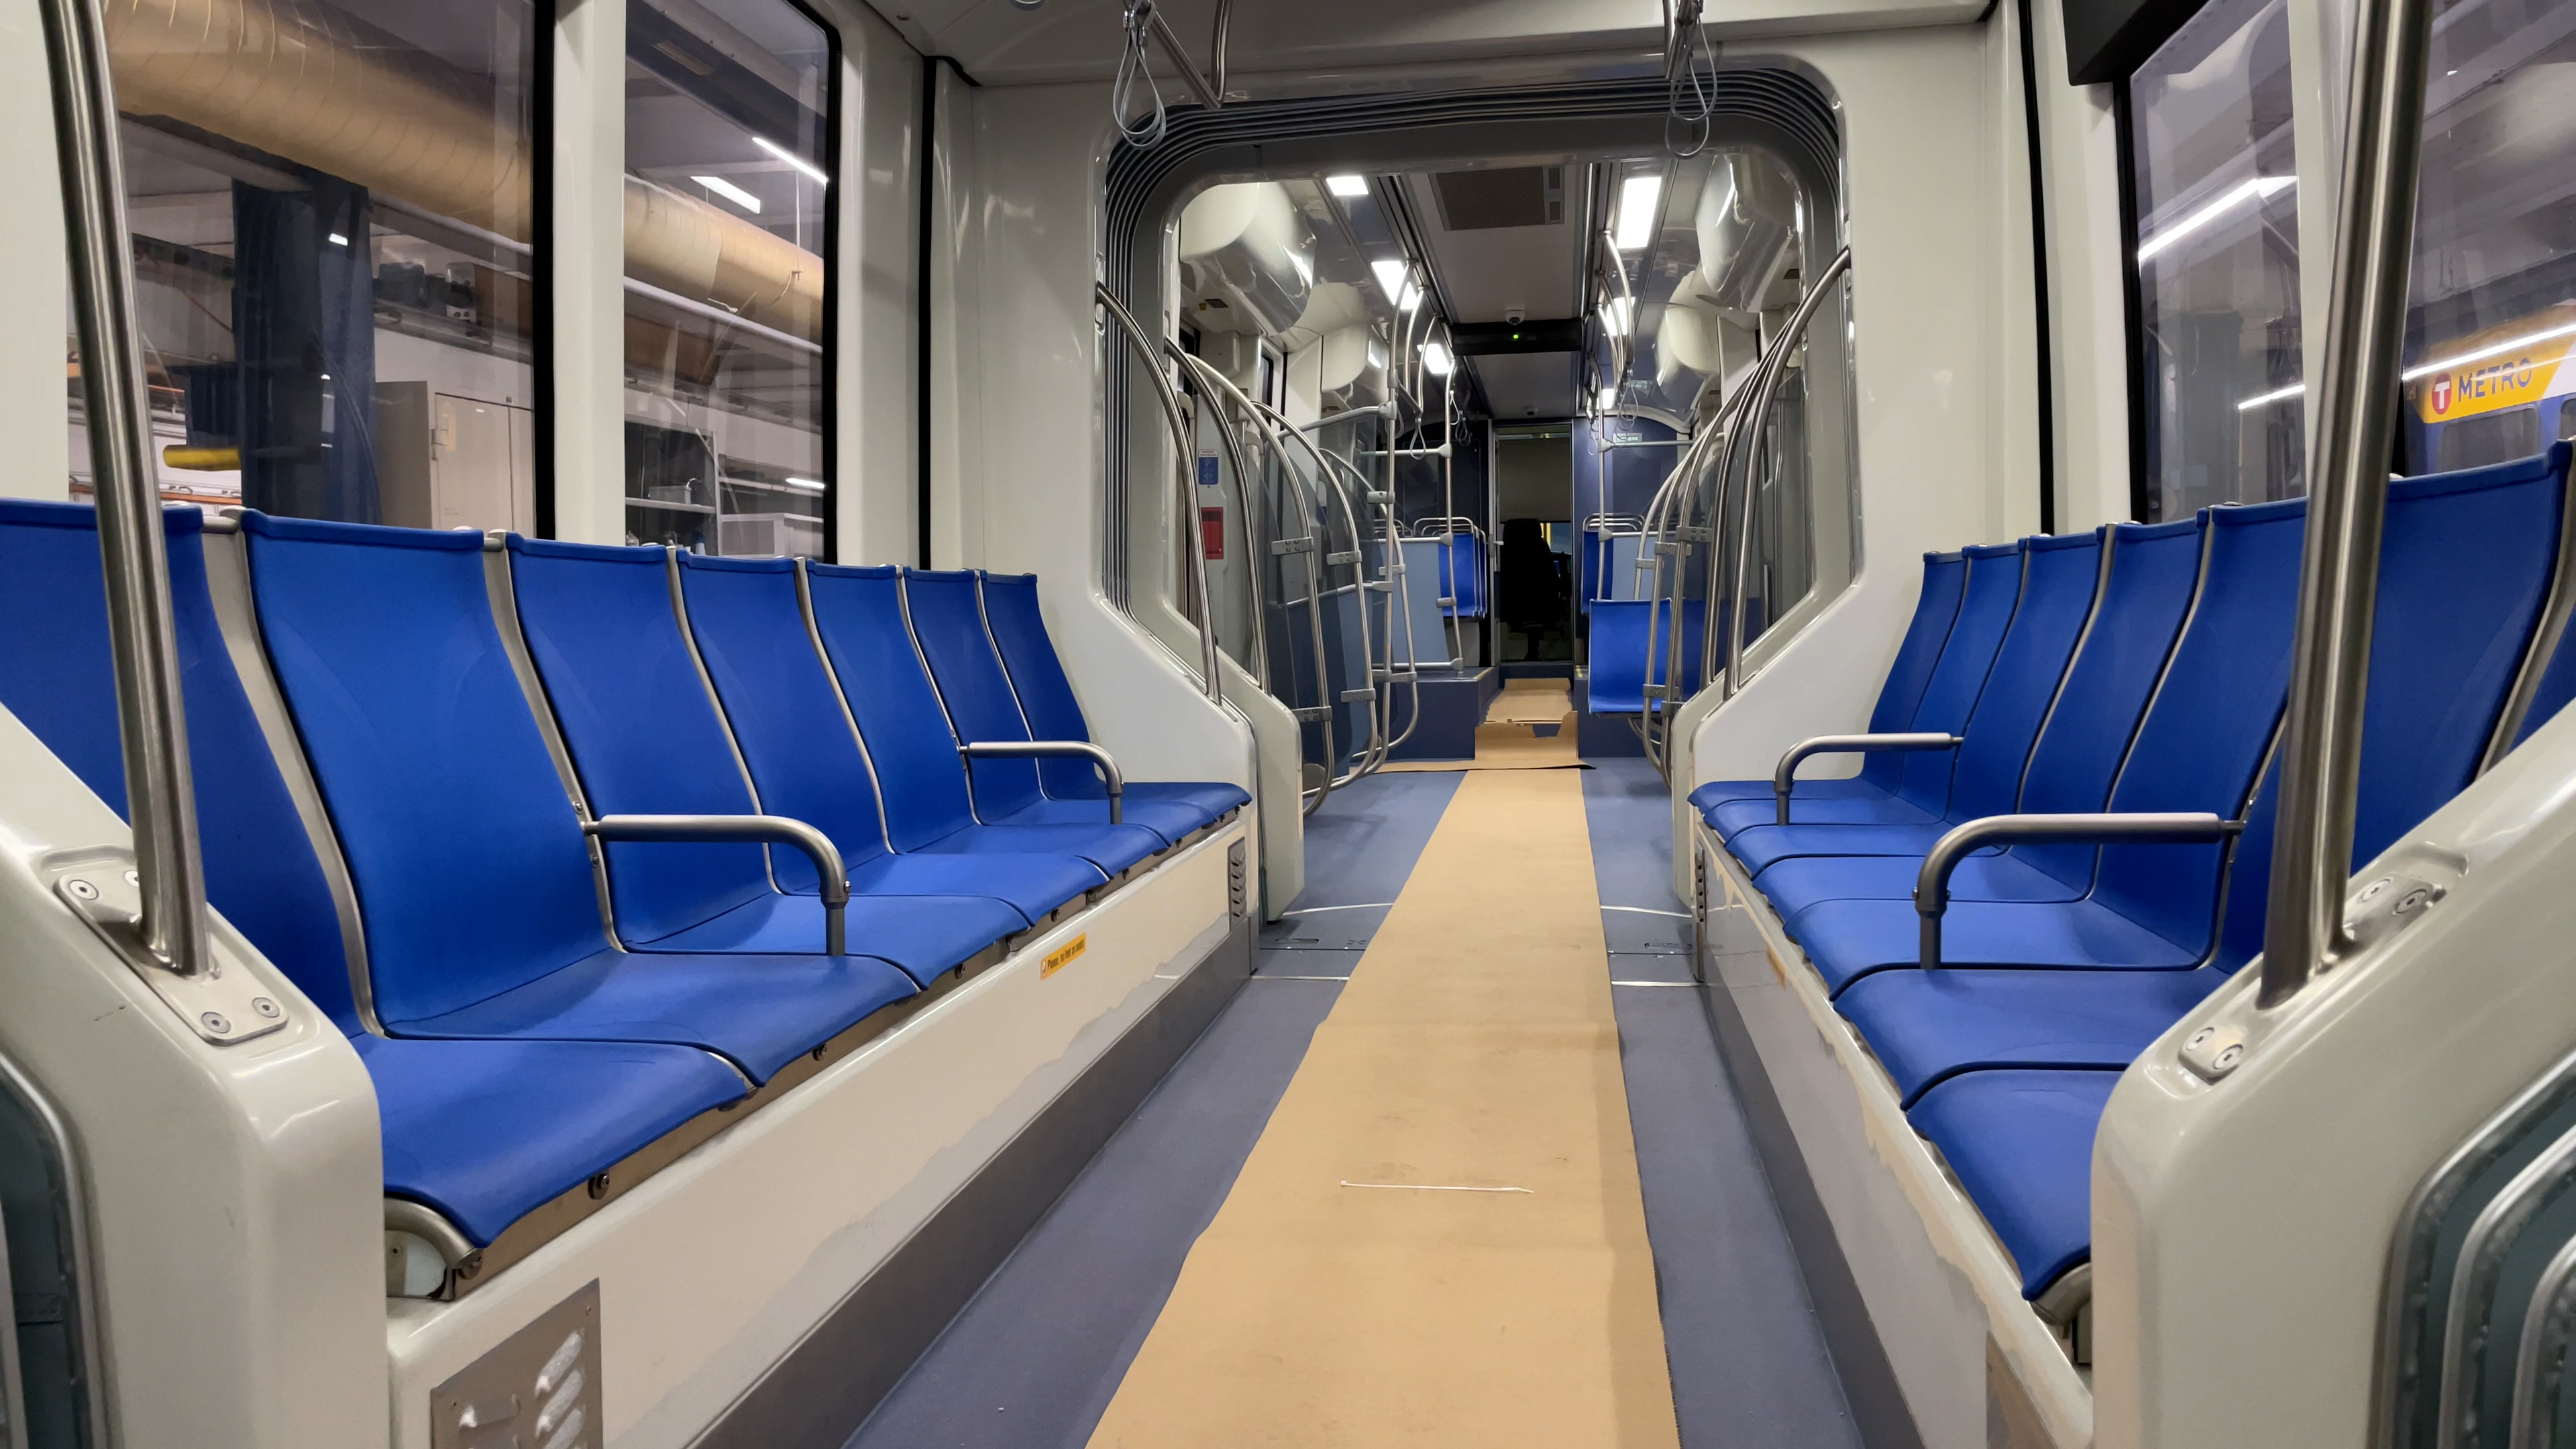 Interior of Type 3 LRV showing linear seating arrangement